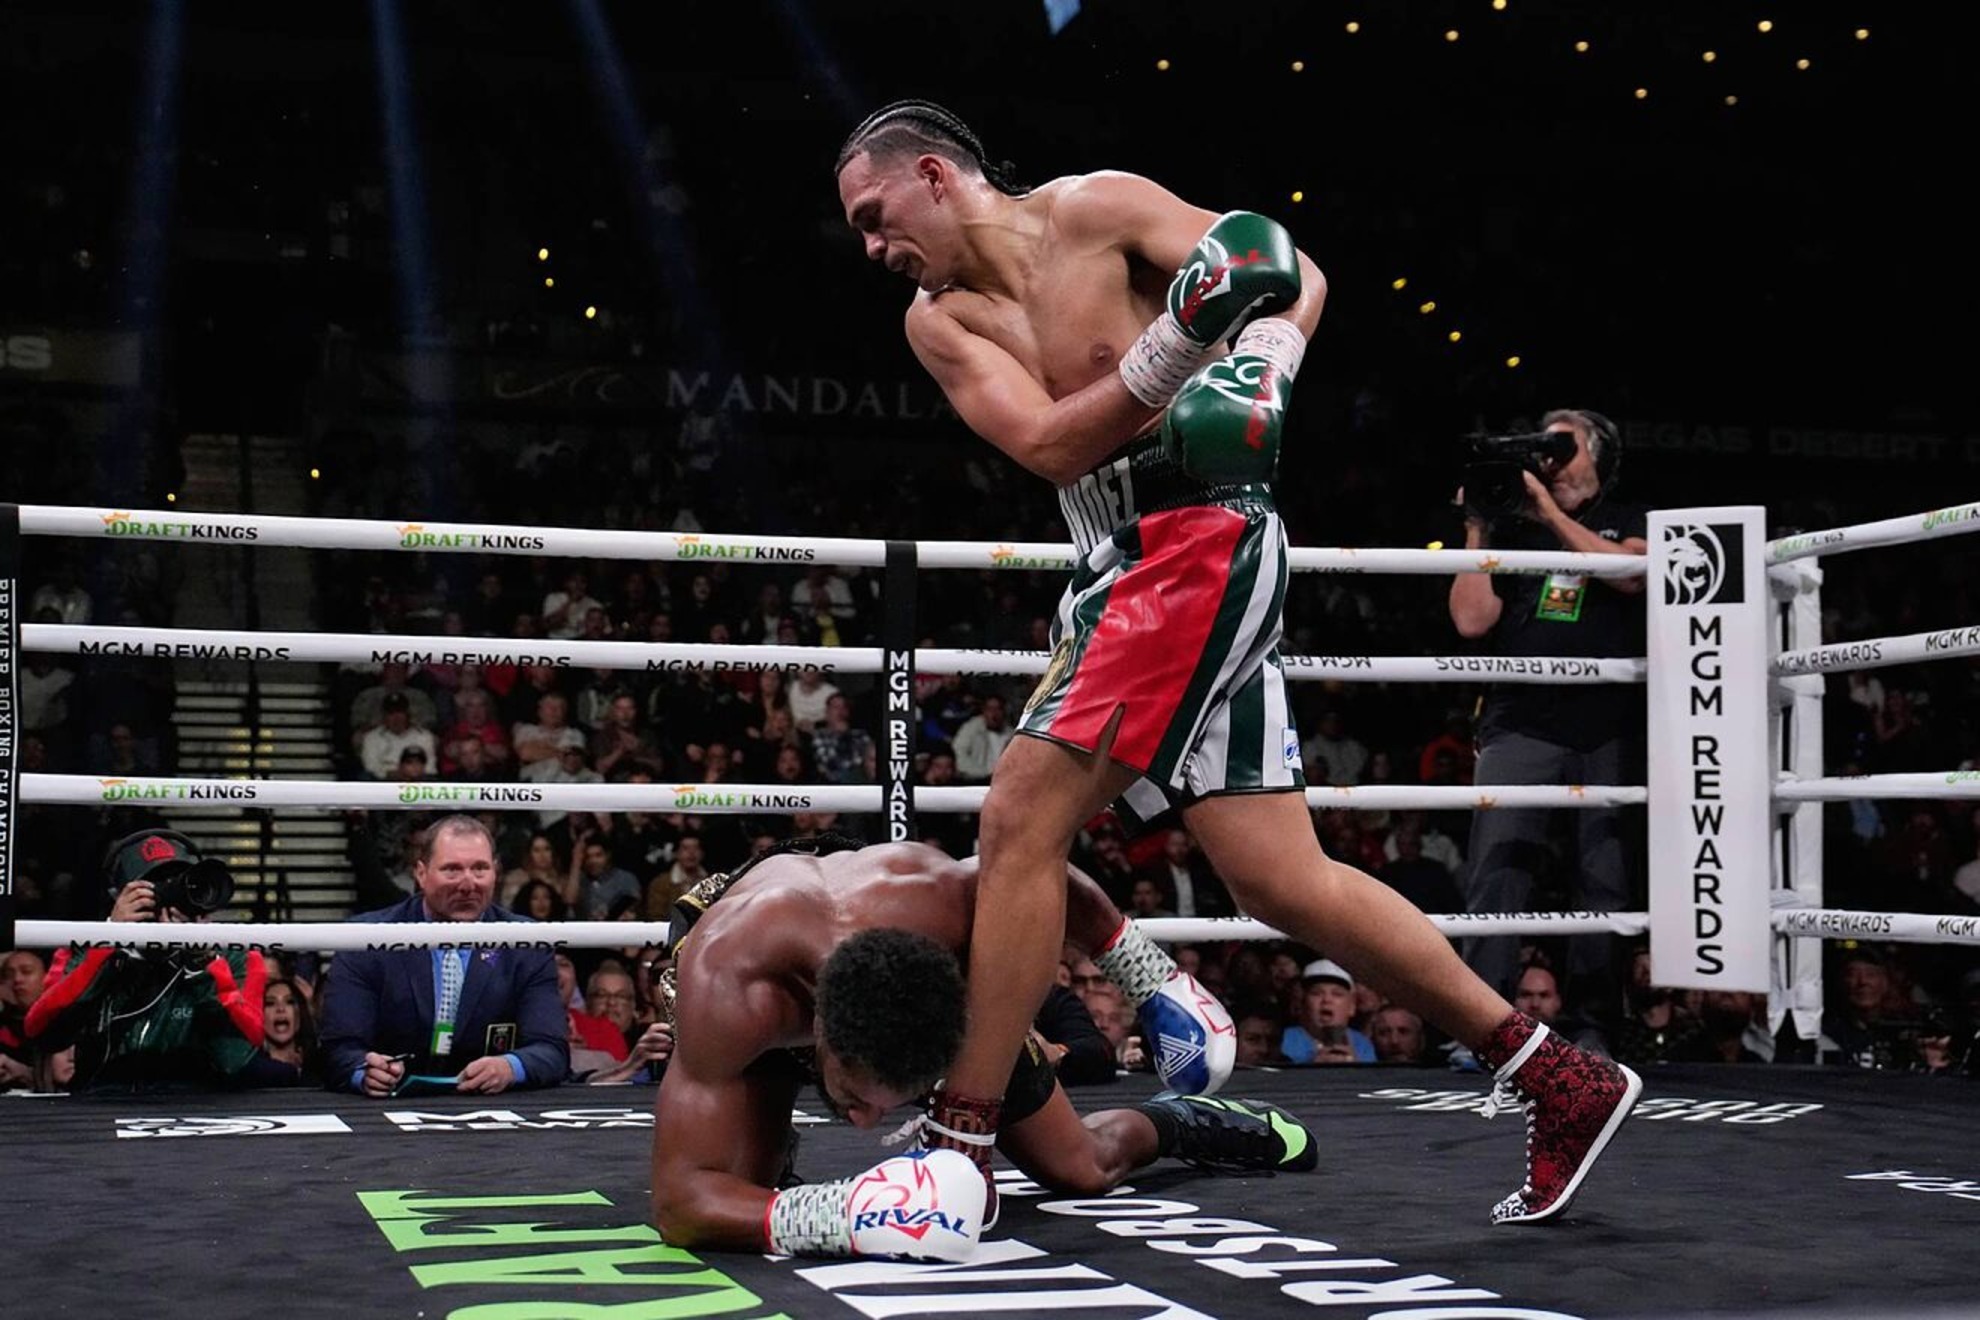 David Benavidez in action during his fight with Demetrius Andrade